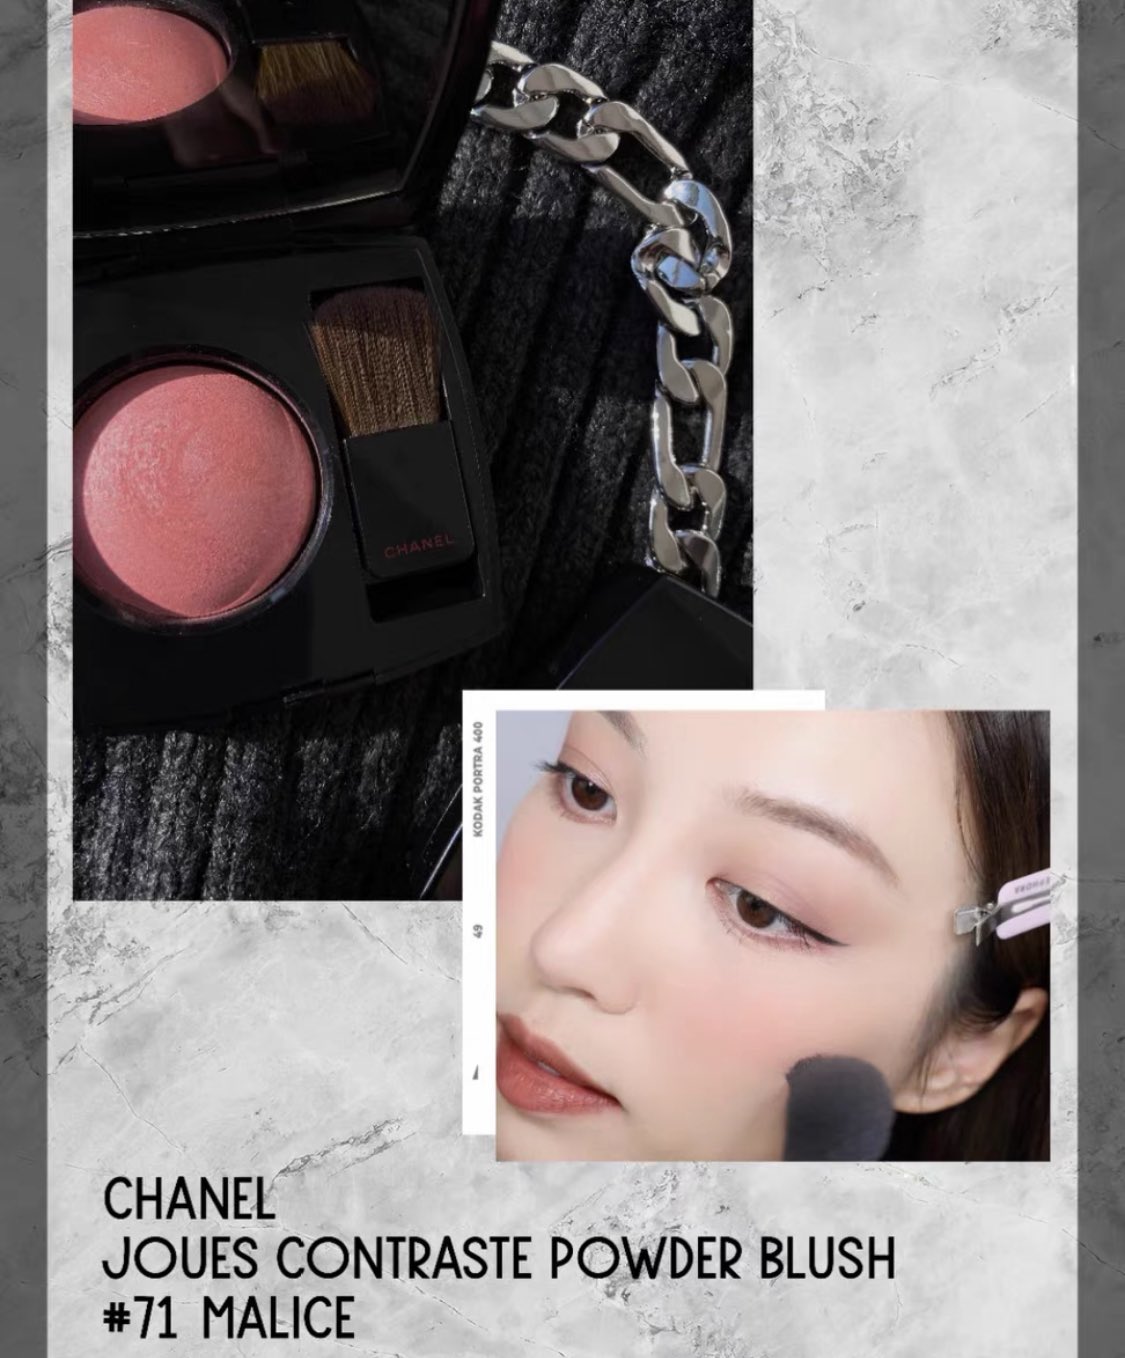 My favourite blush EVERRR! Chanel Joues Contraste 71 Malice